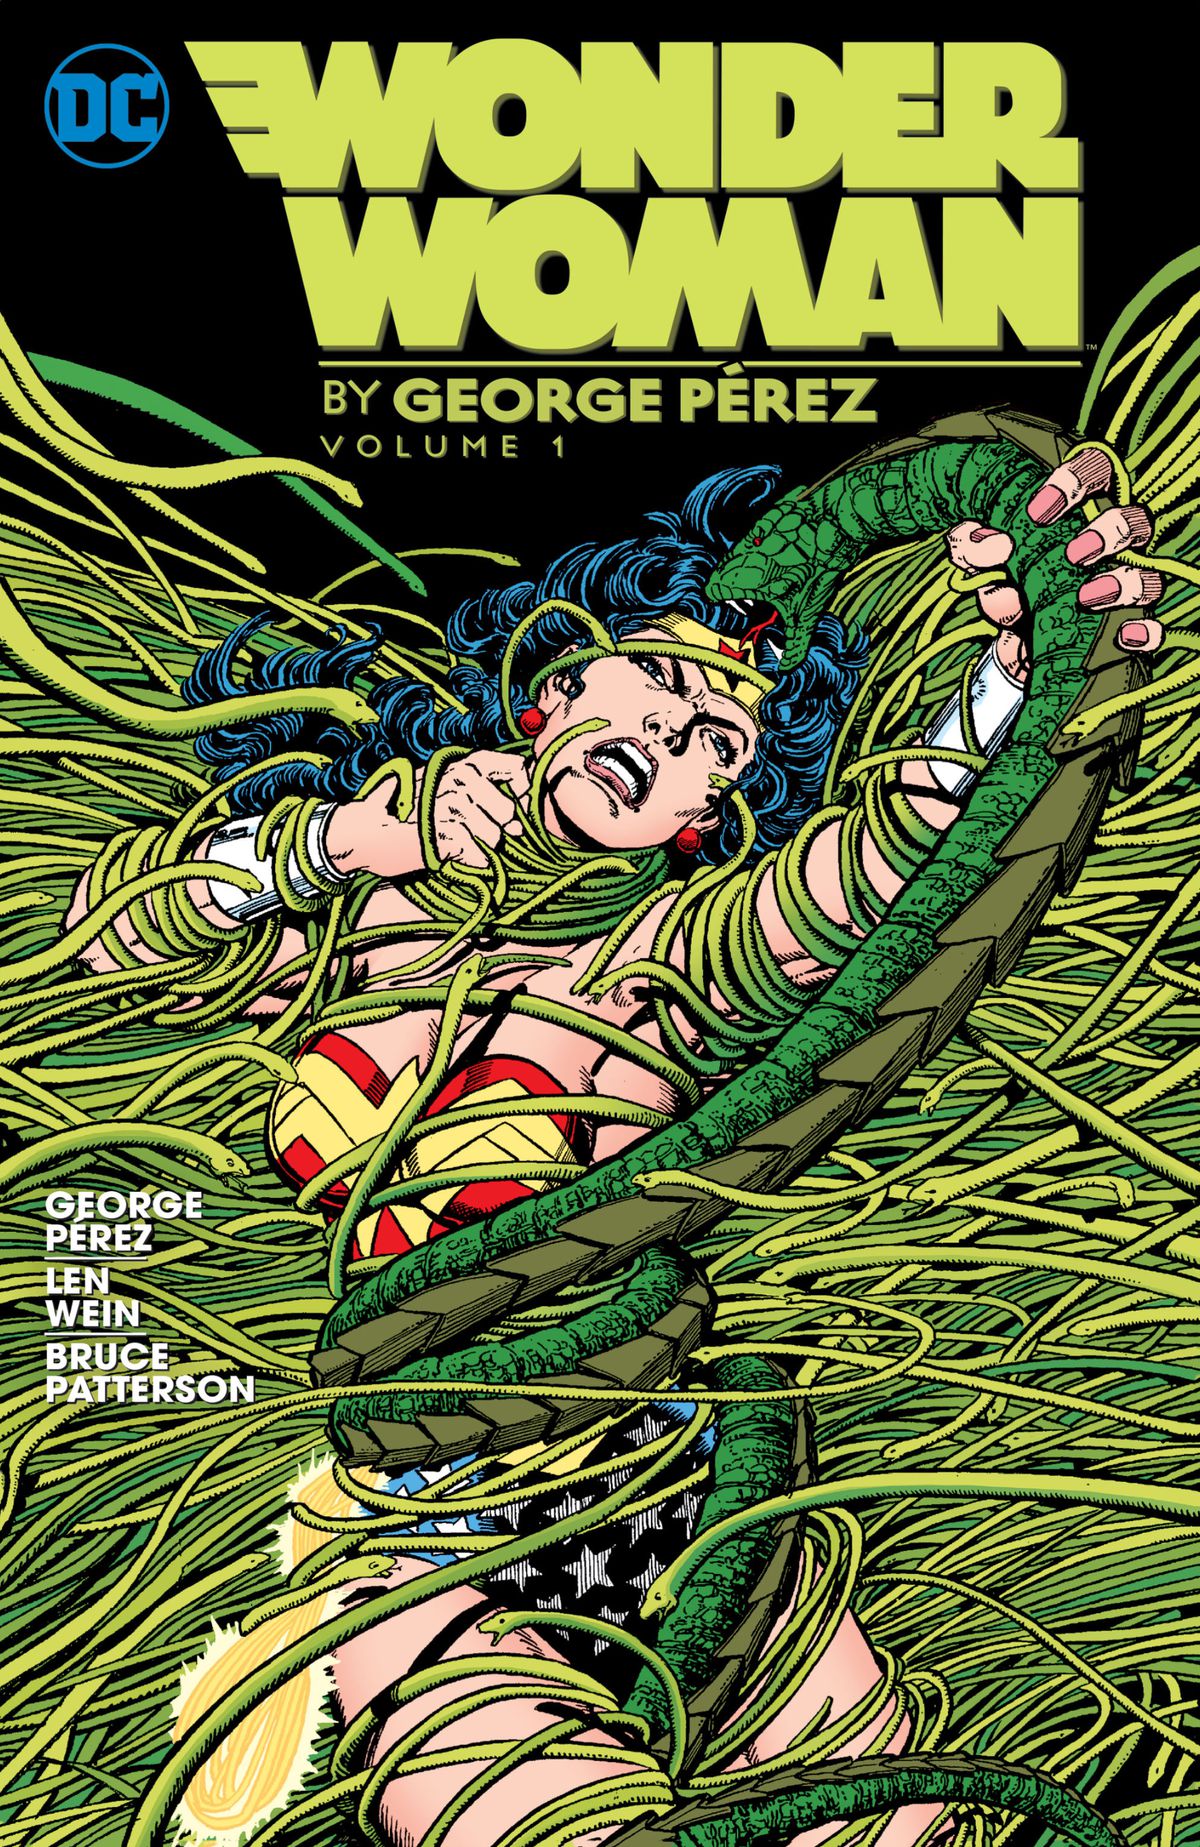 Wonder Woman struggles with hundreds of snakes threatening to engulf her in their coils on the cover of Wonder Woman by George Pérez, DC Comics.